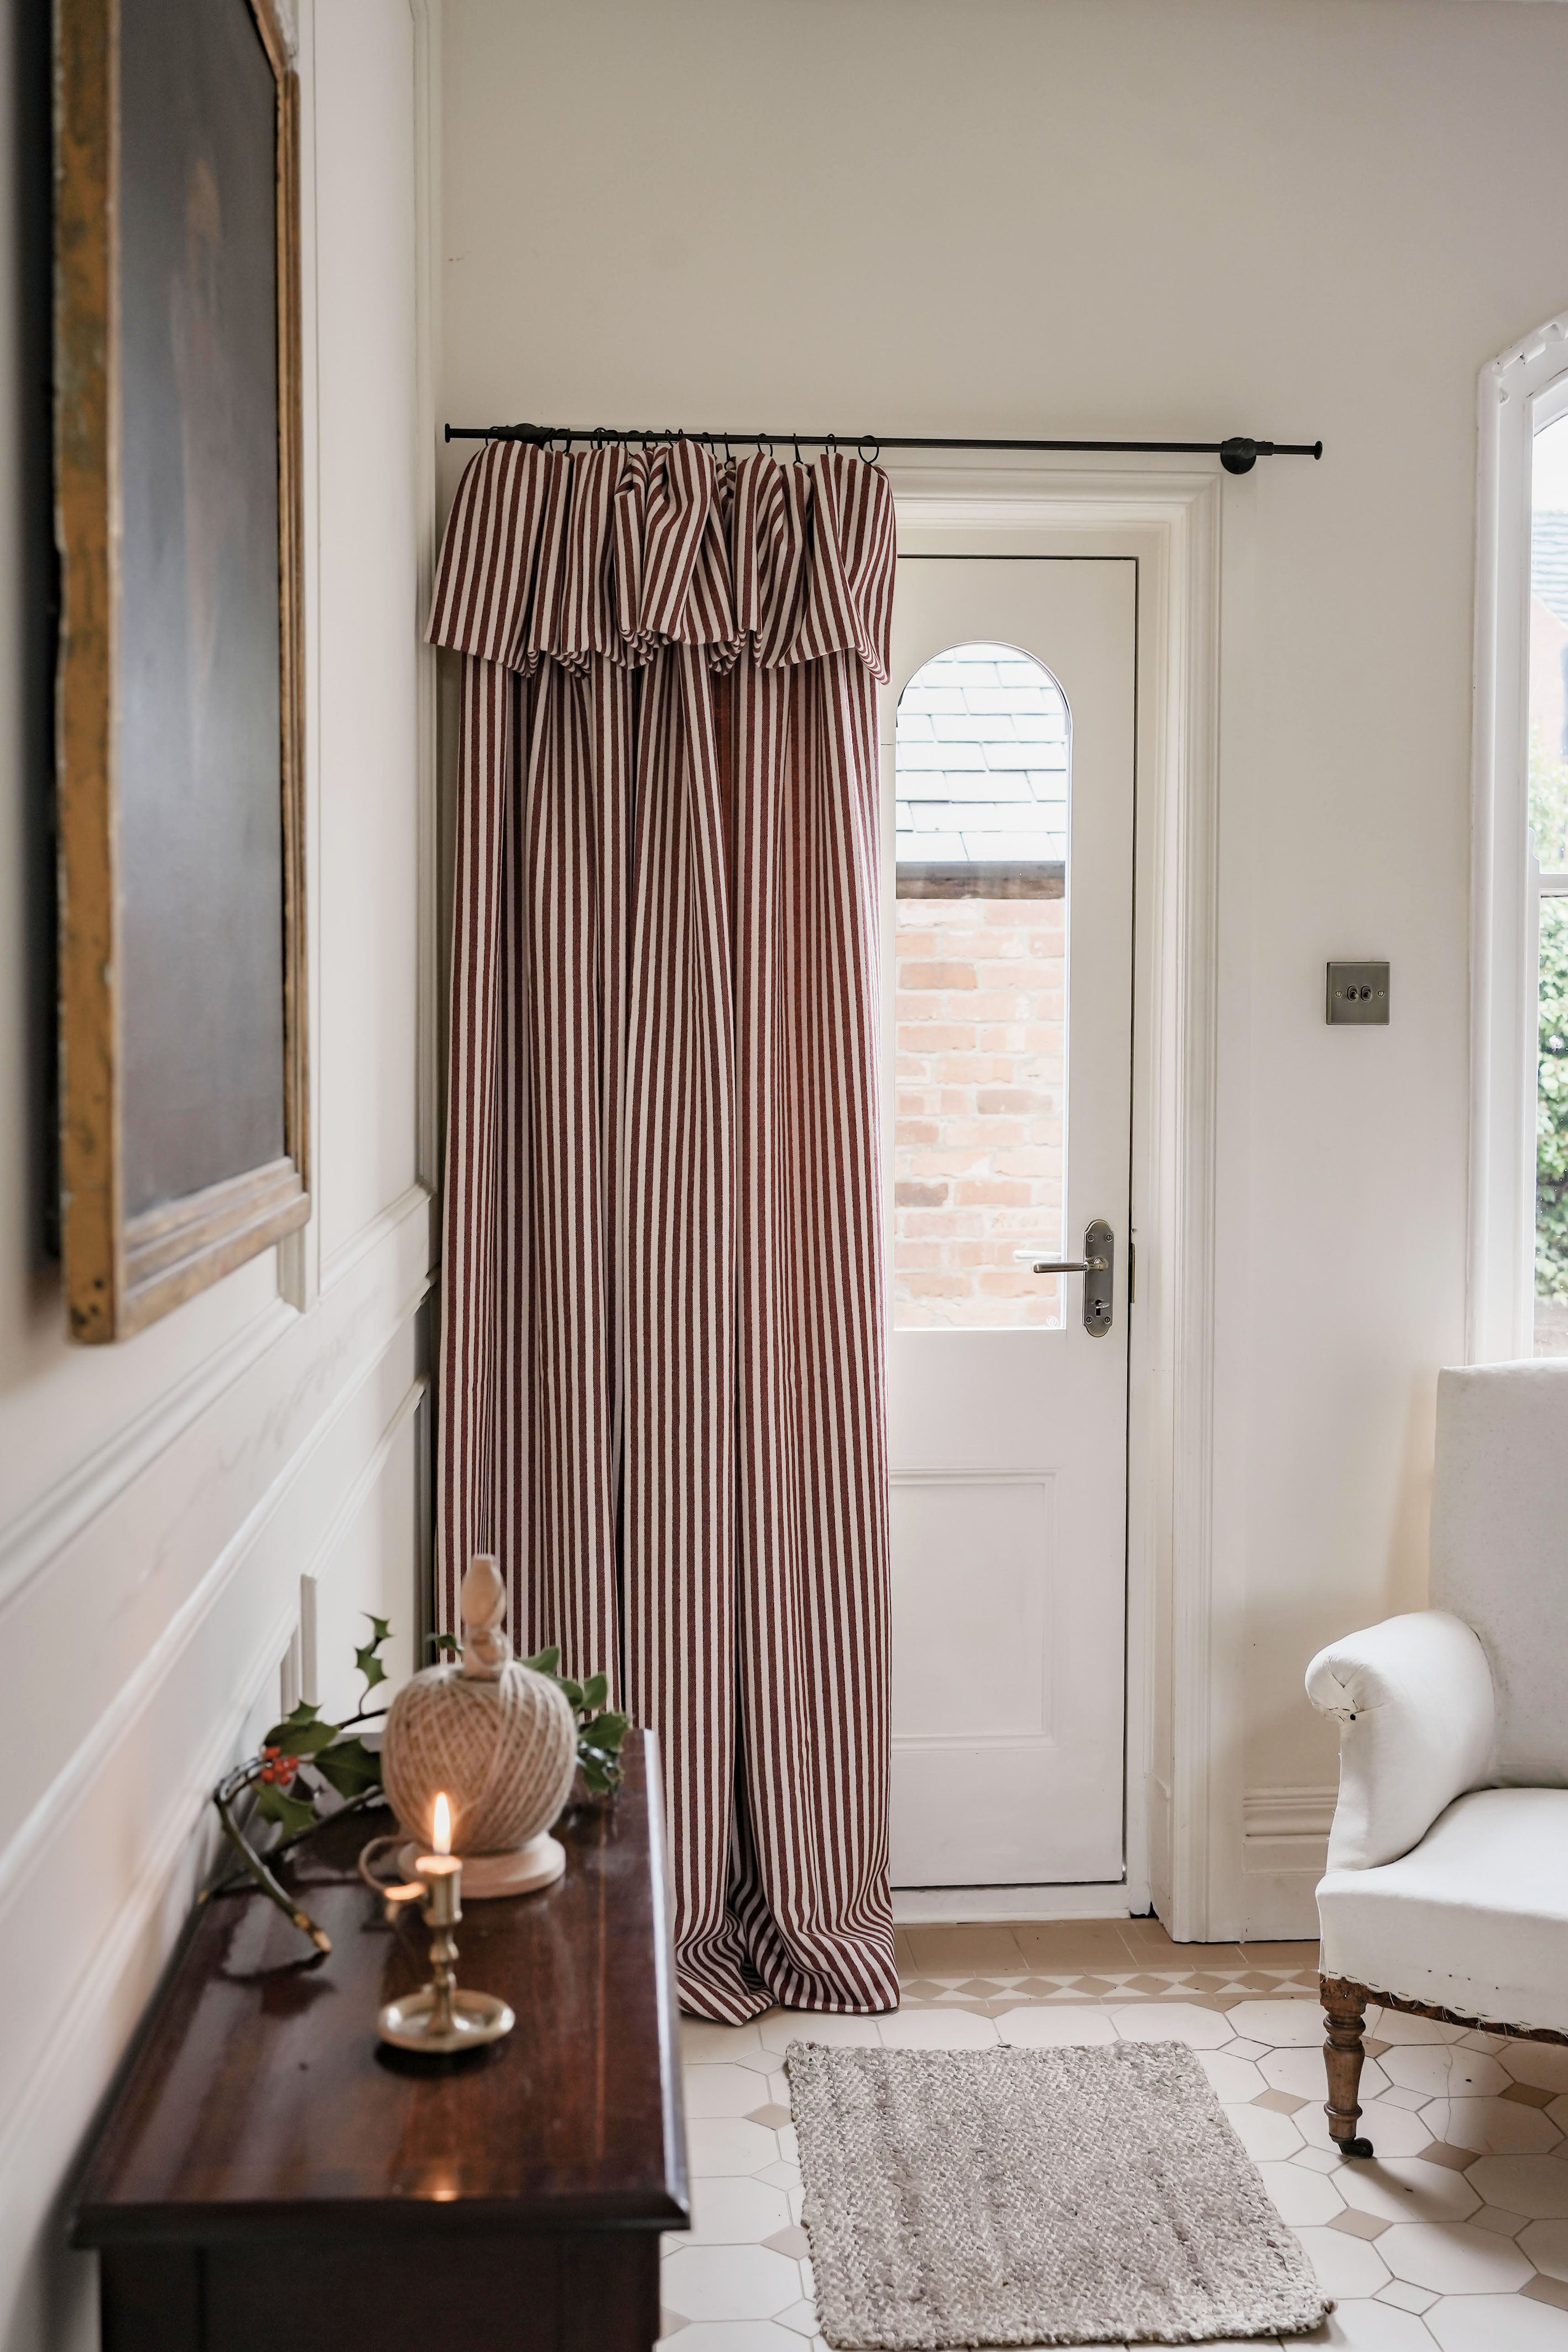 Ready Made Door Curtain - Harbour Stripe Redwood Wool, Flop Over Frill, Thermal Lined